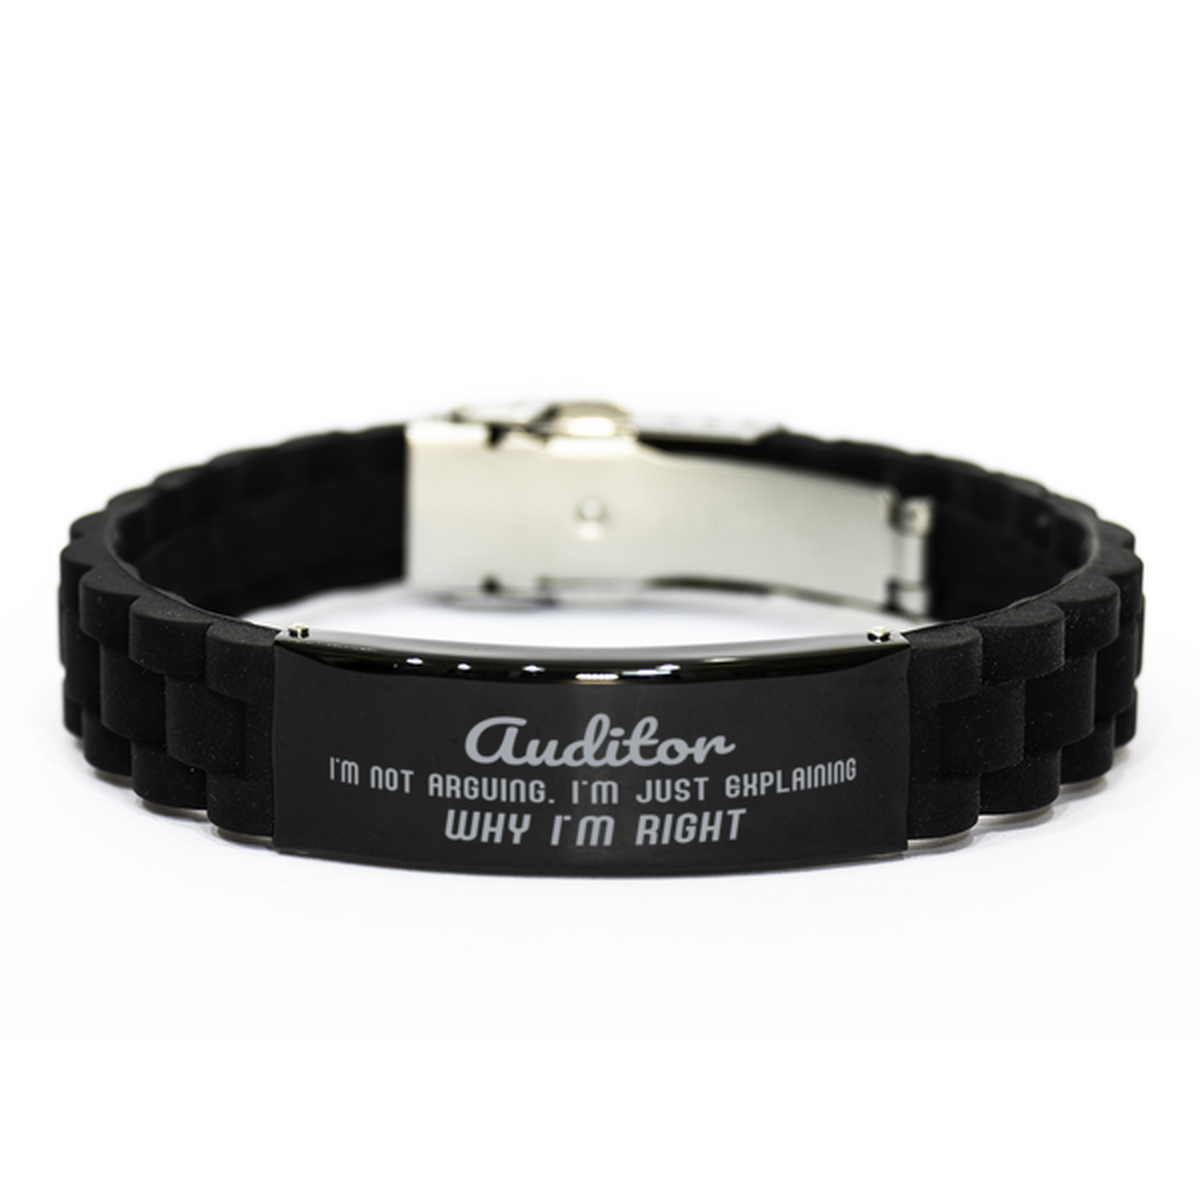 Auditor I'm not Arguing. I'm Just Explaining Why I'm RIGHT Black Glidelock Clasp Bracelet, Funny Saying Quote Auditor Gifts For Auditor Graduation Birthday Christmas Gifts for Men Women Coworker